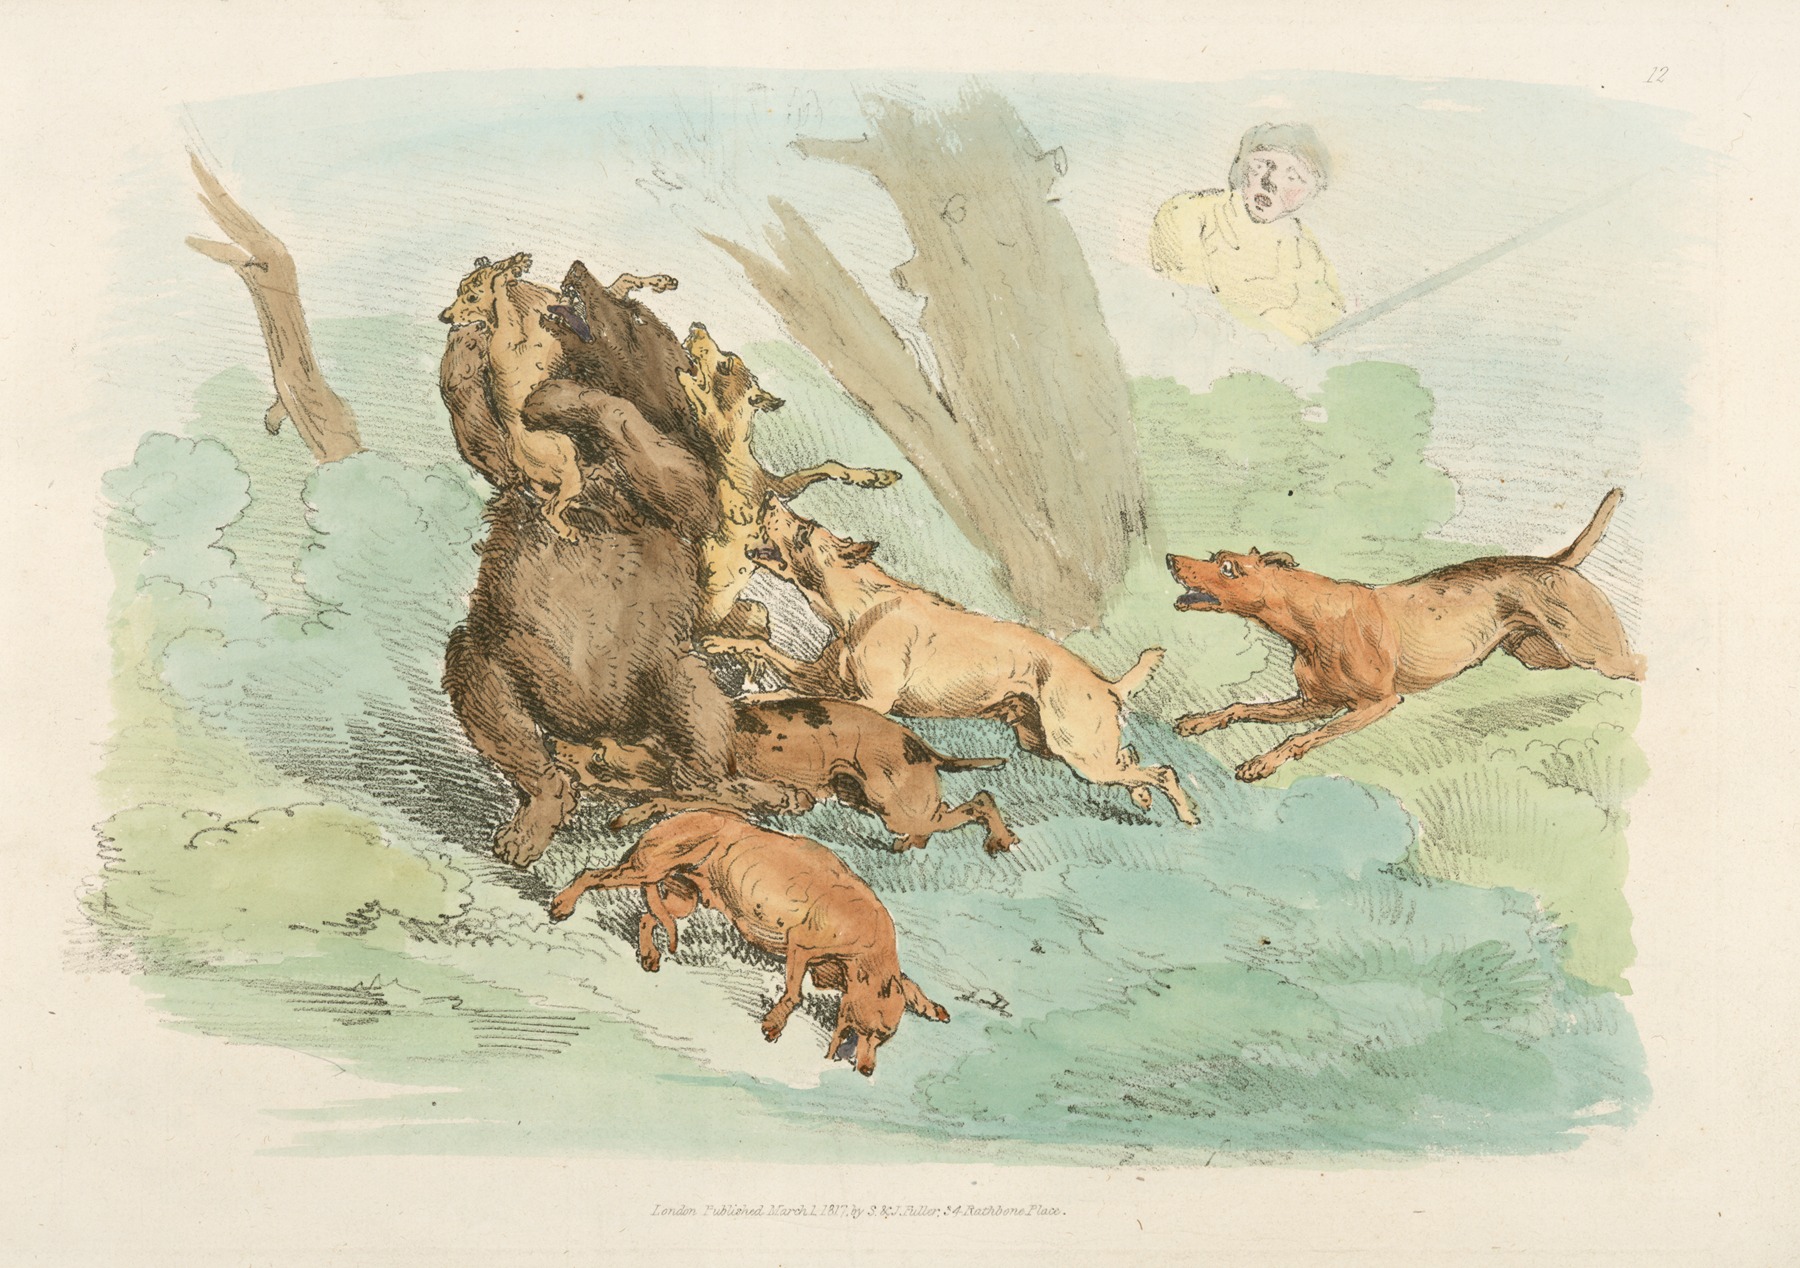 Henry Thomas Alken - Hunting dogs attacking a bear